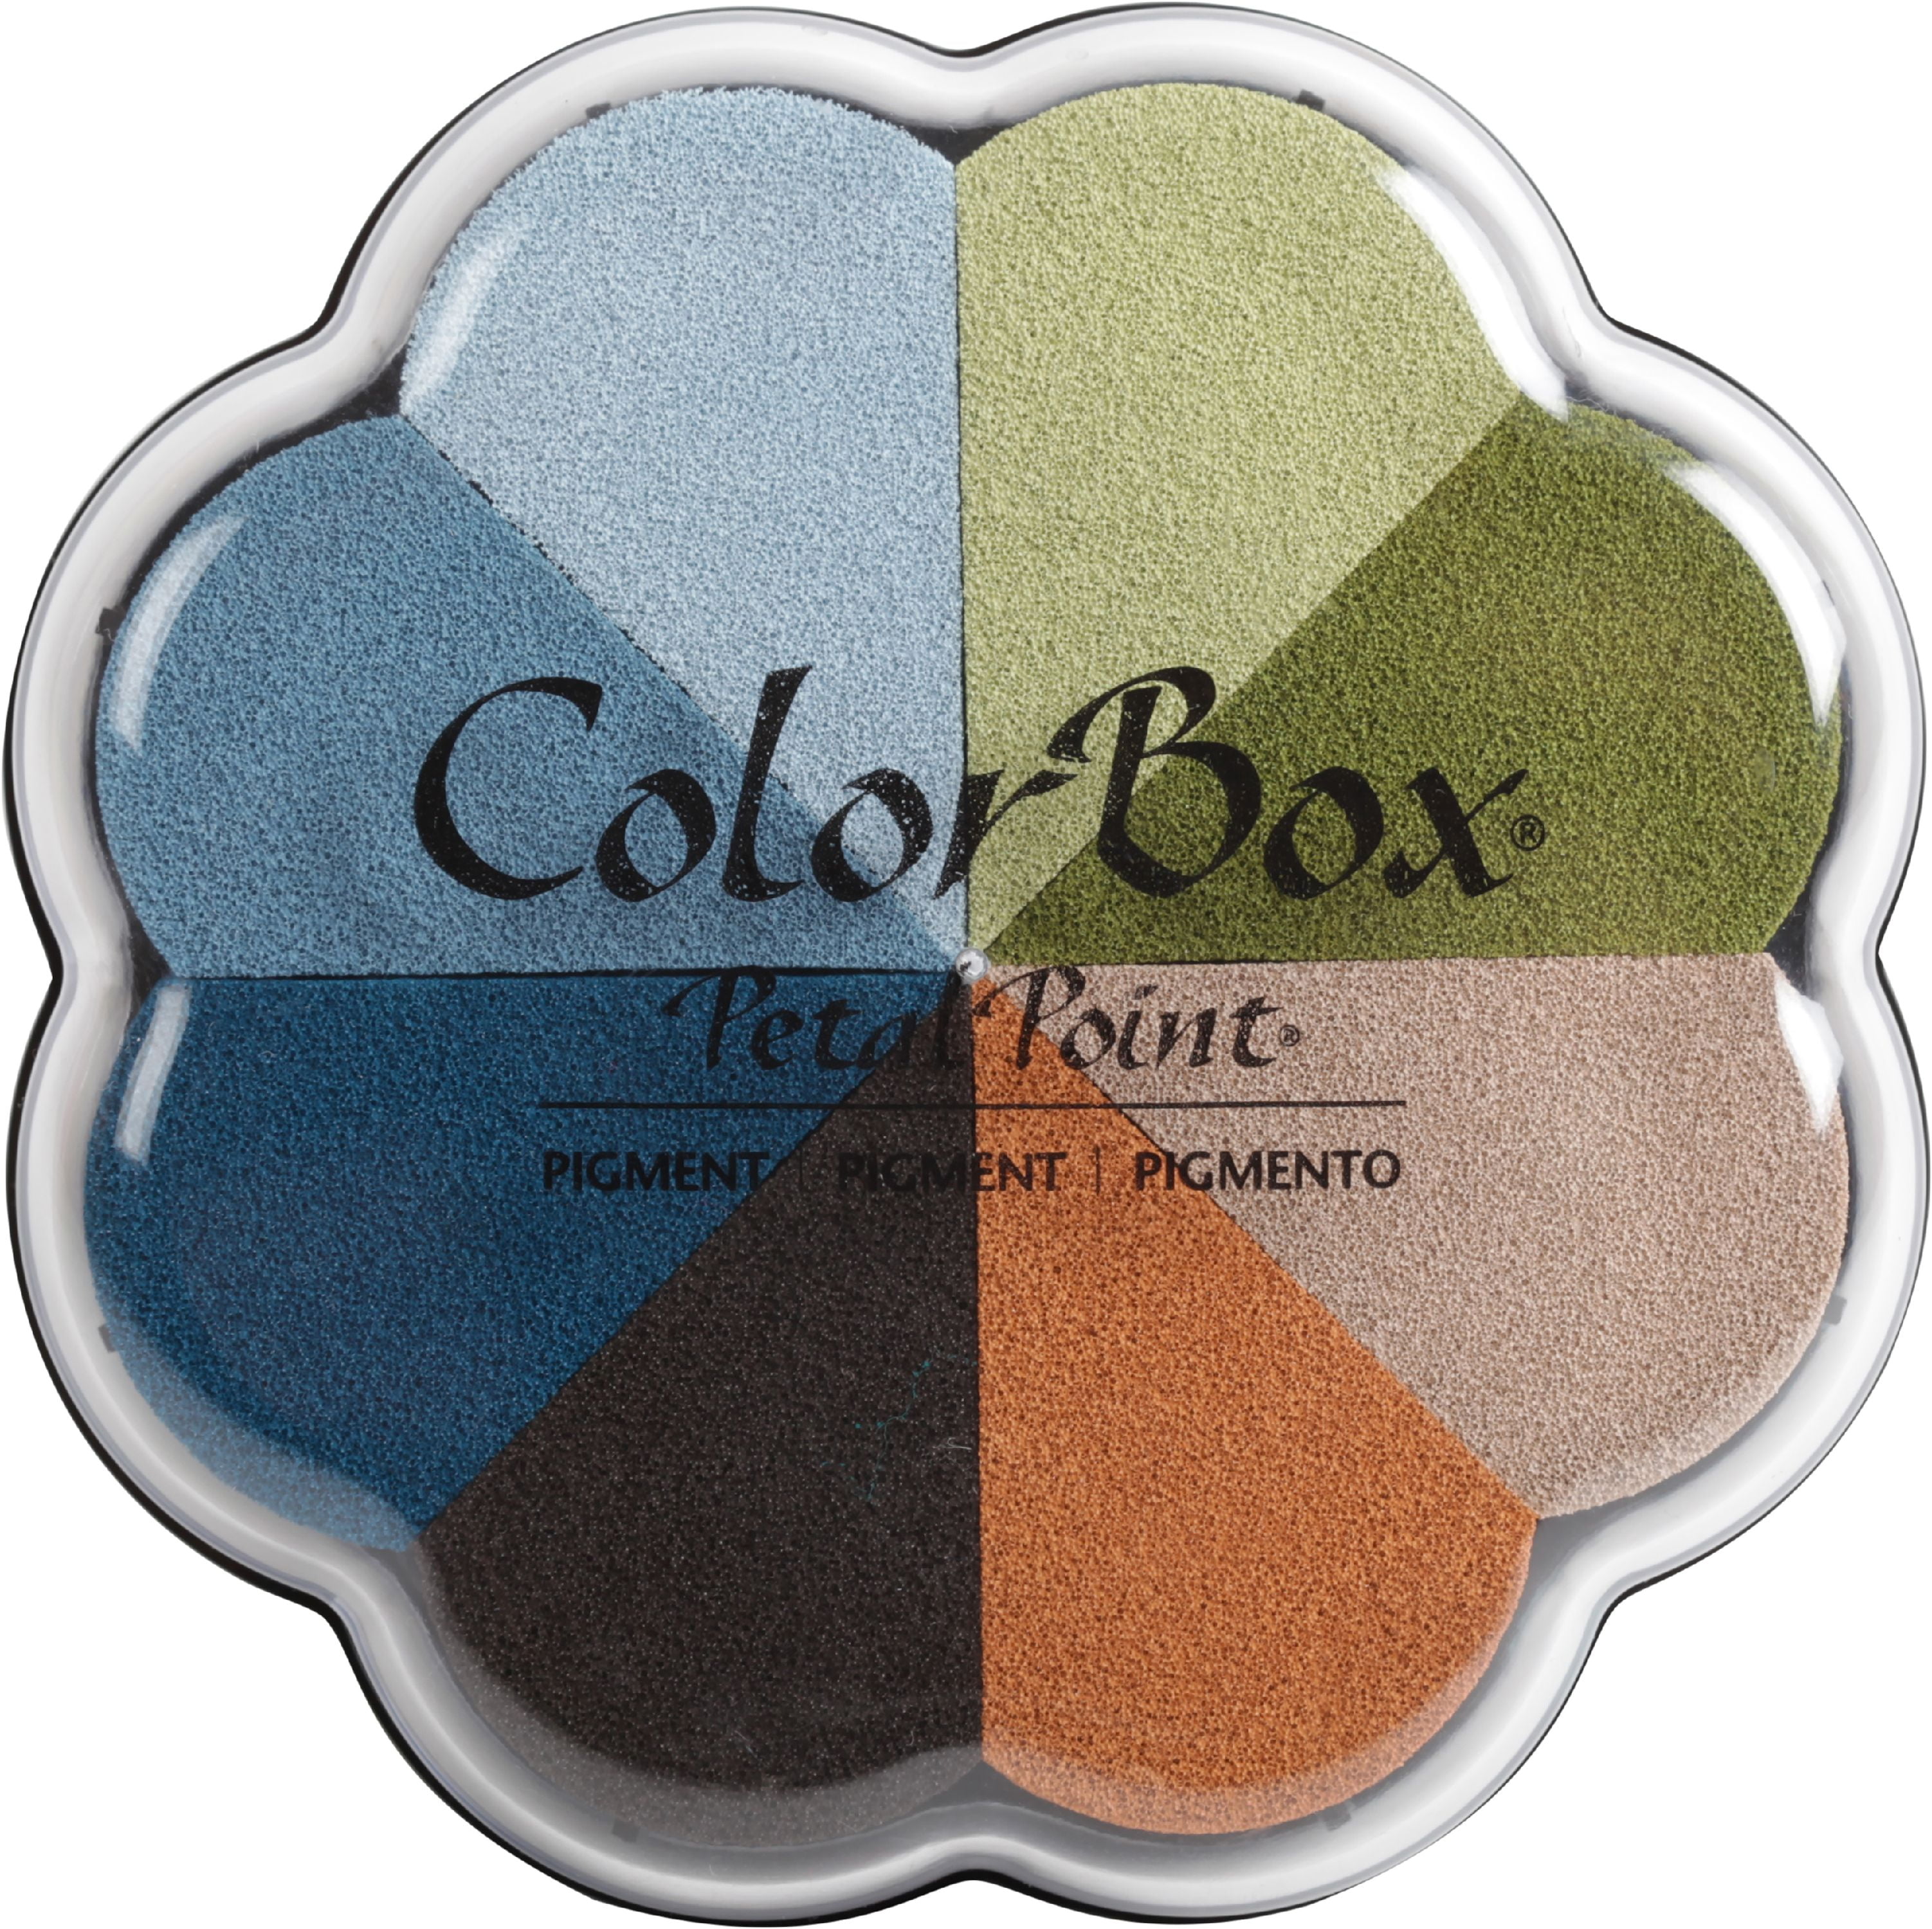 ColorBox Petal Point Ink Pad Celebrate 